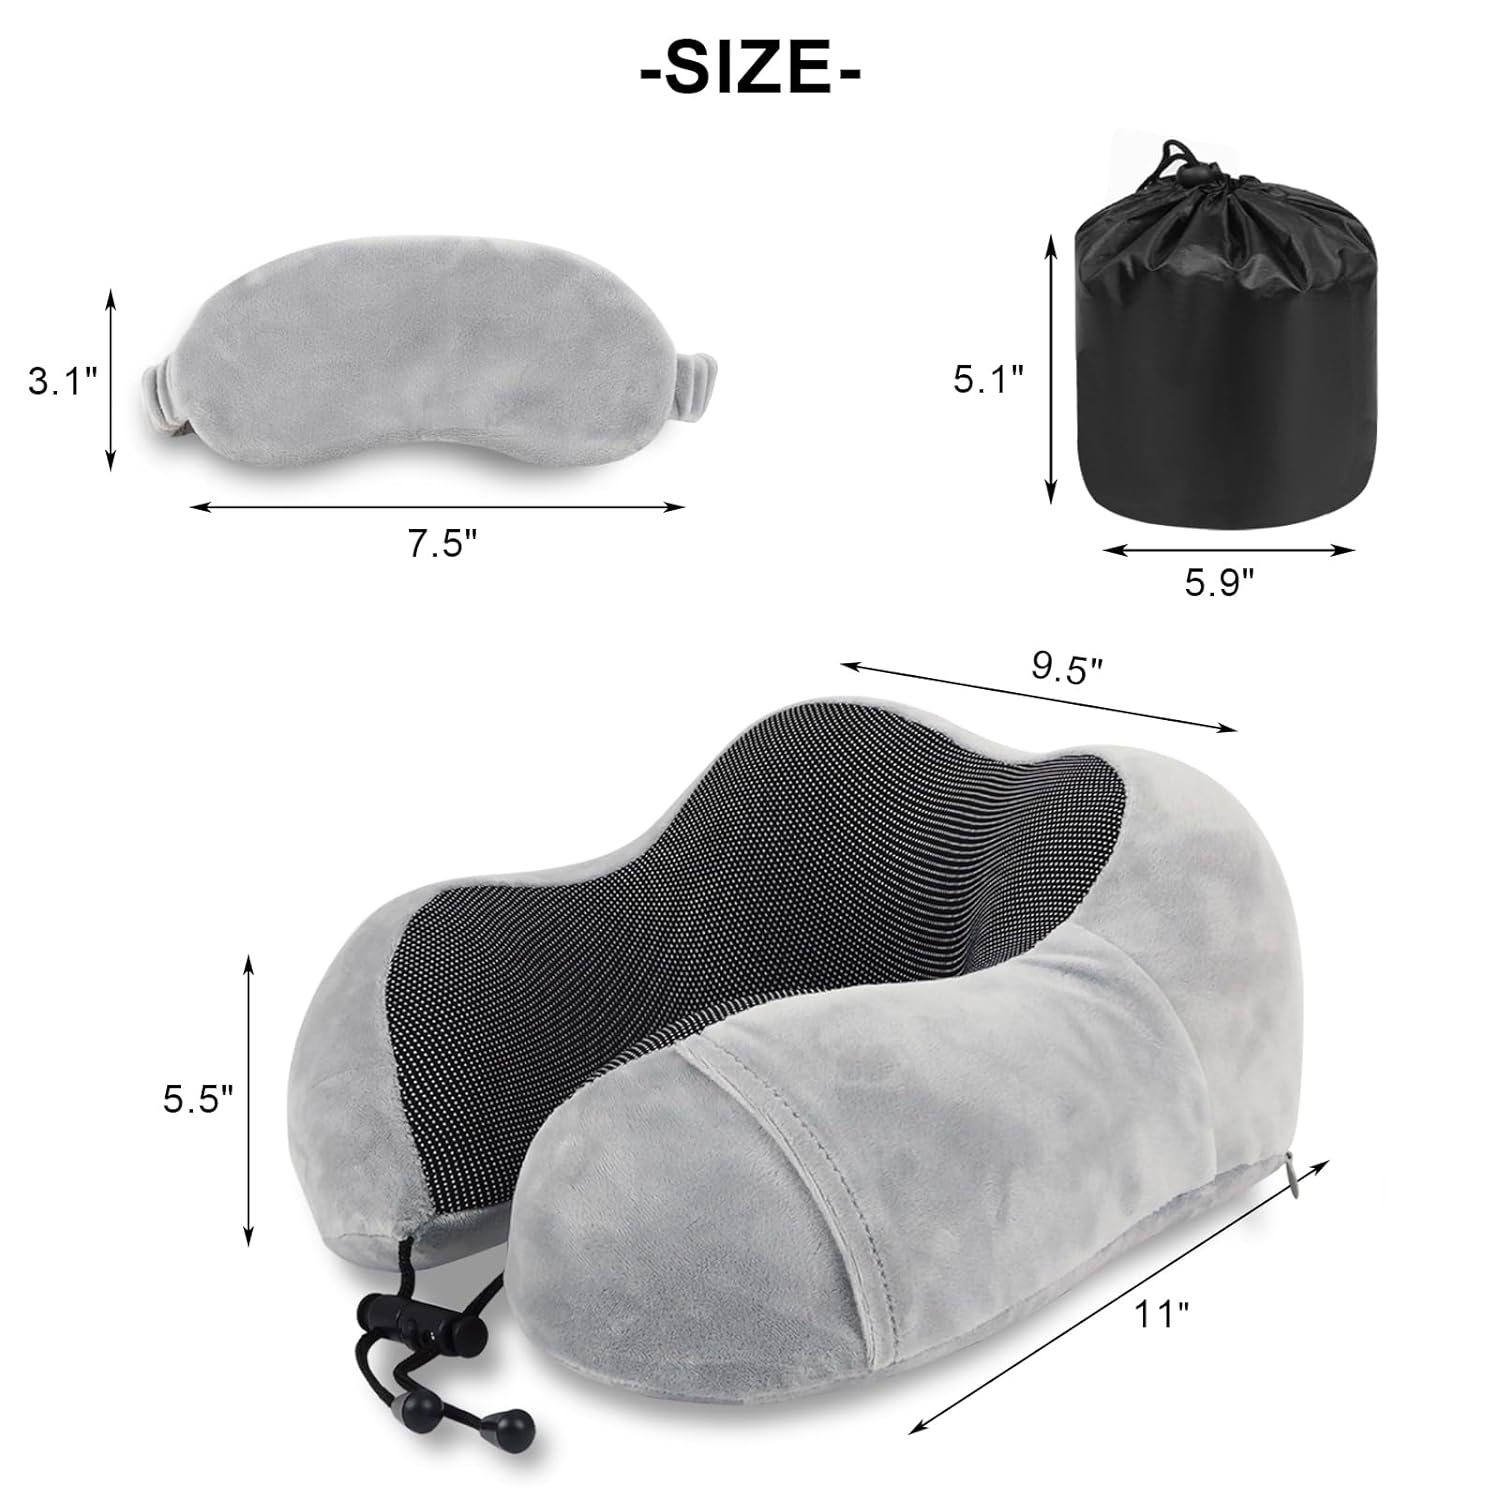 Pure Memory Foam Travel Pillow Set for Adults - Comfortable & Breathable Removable Cover, Airplane Travel Kit with Eye Mask & Portable Storage Bags for Plane Accessories - Grey